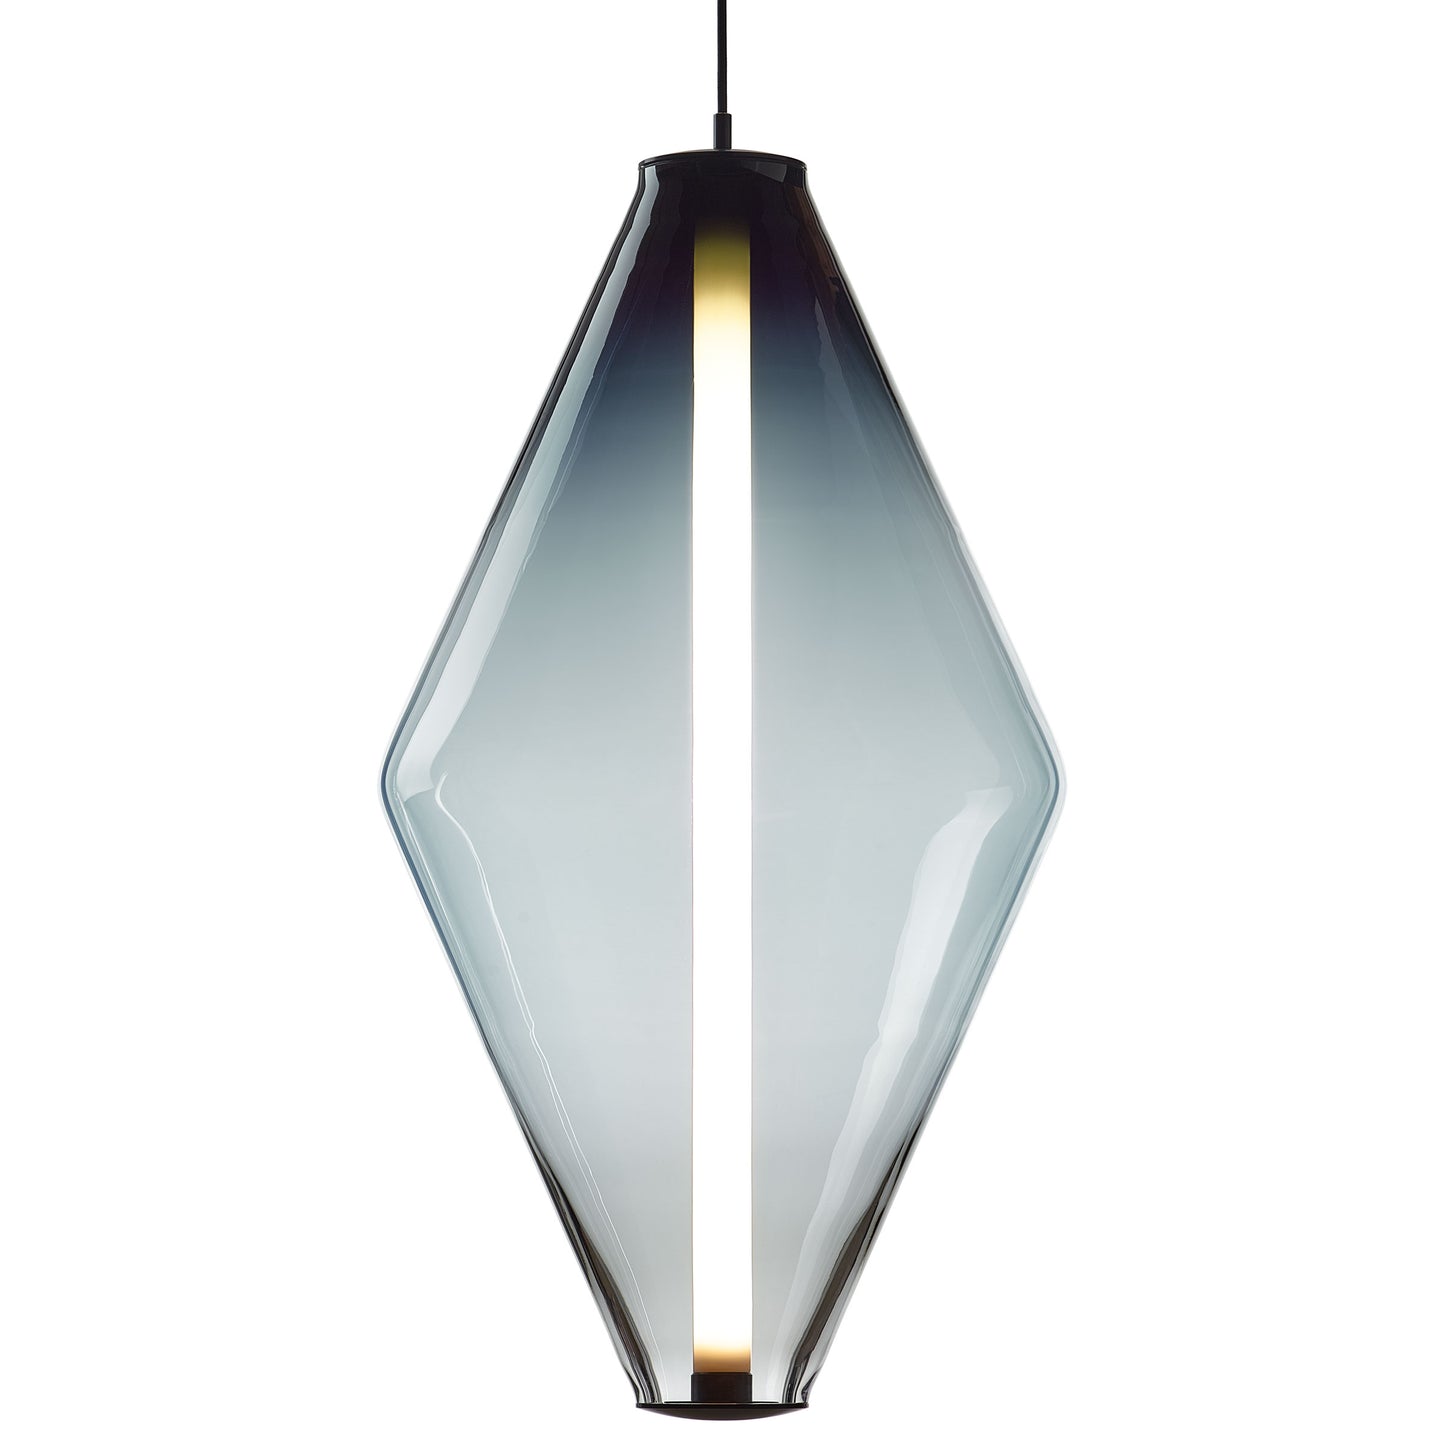 BOMMA - BUOY PENDANT DOUBLE CONE - from $4,798.00